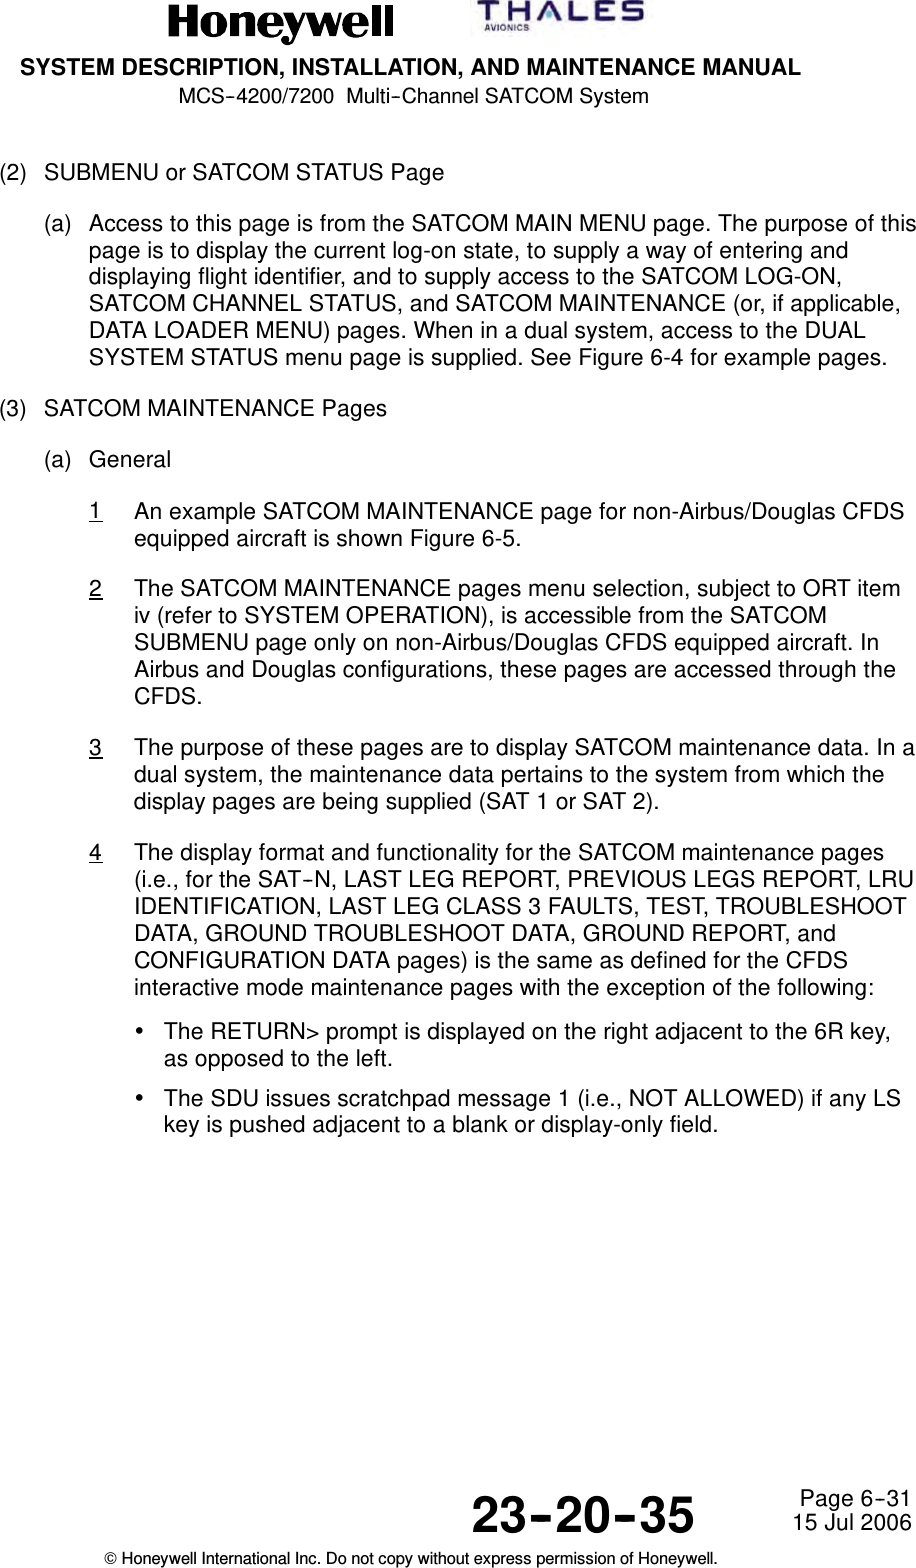 SYSTEM DESCRIPTION, INSTALLATION, AND MAINTENANCE MANUALMCS--4200/7200 Multi--Channel SATCOM System23--20--35 15 Jul 2006Honeywell International Inc. Do not copy without express permission of Honeywell.Page 6--31(2) SUBMENU or SATCOM STATUS Page(a) Access to this page is from the SATCOM MAIN MENU page. The purpose of thispage is to display the current log-on state, to supply a way of entering anddisplaying flight identifier, and to supply access to the SATCOM LOG-ON,SATCOM CHANNEL STATUS, and SATCOM MAINTENANCE (or, if applicable,DATA LOADER MENU) pages. When in a dual system, access to the DUALSYSTEM STATUS menu page is supplied. See Figure 6-4 for example pages.(3) SATCOM MAINTENANCE Pages(a) General1An example SATCOM MAINTENANCE page for non-Airbus/Douglas CFDSequipped aircraft is shown Figure 6-5.2The SATCOM MAINTENANCE pages menu selection, subject to ORT itemiv (refer to SYSTEM OPERATION), is accessible from the SATCOMSUBMENU page only on non-Airbus/Douglas CFDS equipped aircraft. InAirbus and Douglas configurations, these pages are accessed through theCFDS.3The purpose of these pages are to display SATCOM maintenance data. In adual system, the maintenance data pertains to the system from which thedisplay pages are being supplied (SAT 1 or SAT 2).4The display format and functionality for the SATCOM maintenance pages(i.e., for the SAT--N, LAST LEG REPORT, PREVIOUS LEGS REPORT, LRUIDENTIFICATION, LAST LEG CLASS 3 FAULTS, TEST, TROUBLESHOOTDATA, GROUND TROUBLESHOOT DATA, GROUND REPORT, andCONFIGURATION DATA pages) is the same as defined for the CFDSinteractive mode maintenance pages with the exception of the following:•The RETURN&gt; prompt is displayed on the right adjacent to the 6R key,as opposed to the left.•The SDU issues scratchpad message 1 (i.e., NOT ALLOWED) if any LSkey is pushed adjacent to a blank or display-only field.